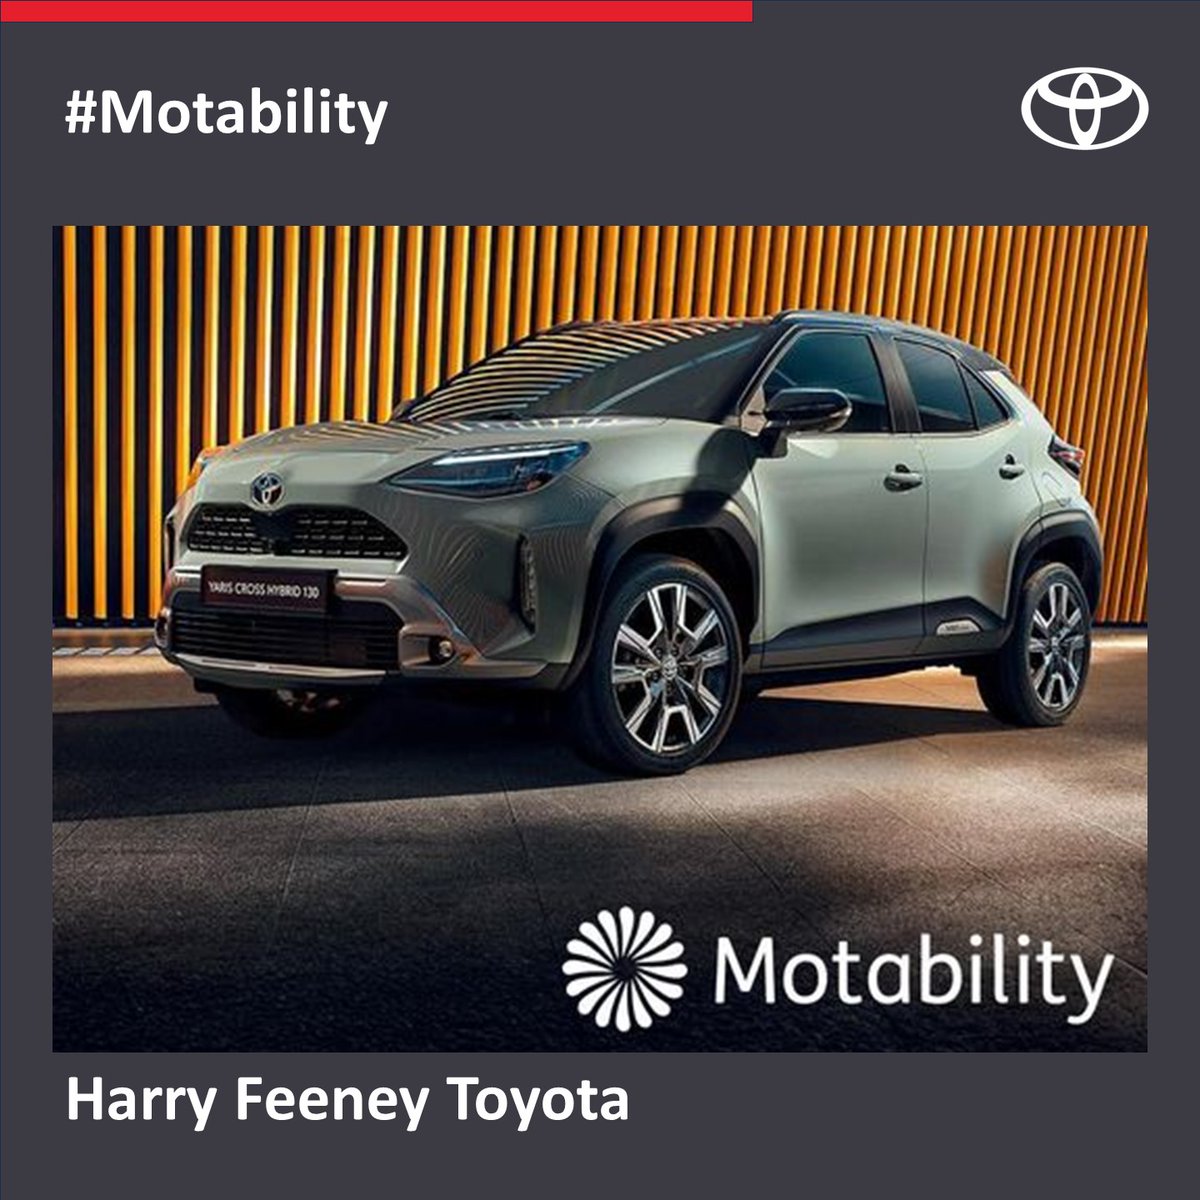 Discover your dream Toyota with our hassle-free Motability offers at Harry Feeney Toyota starting from £NIL Advance Payment. 🚗💫Check out all the deals here: bit.ly/48OommF 
T&C’s apply. Visit our website for more details. 🌟